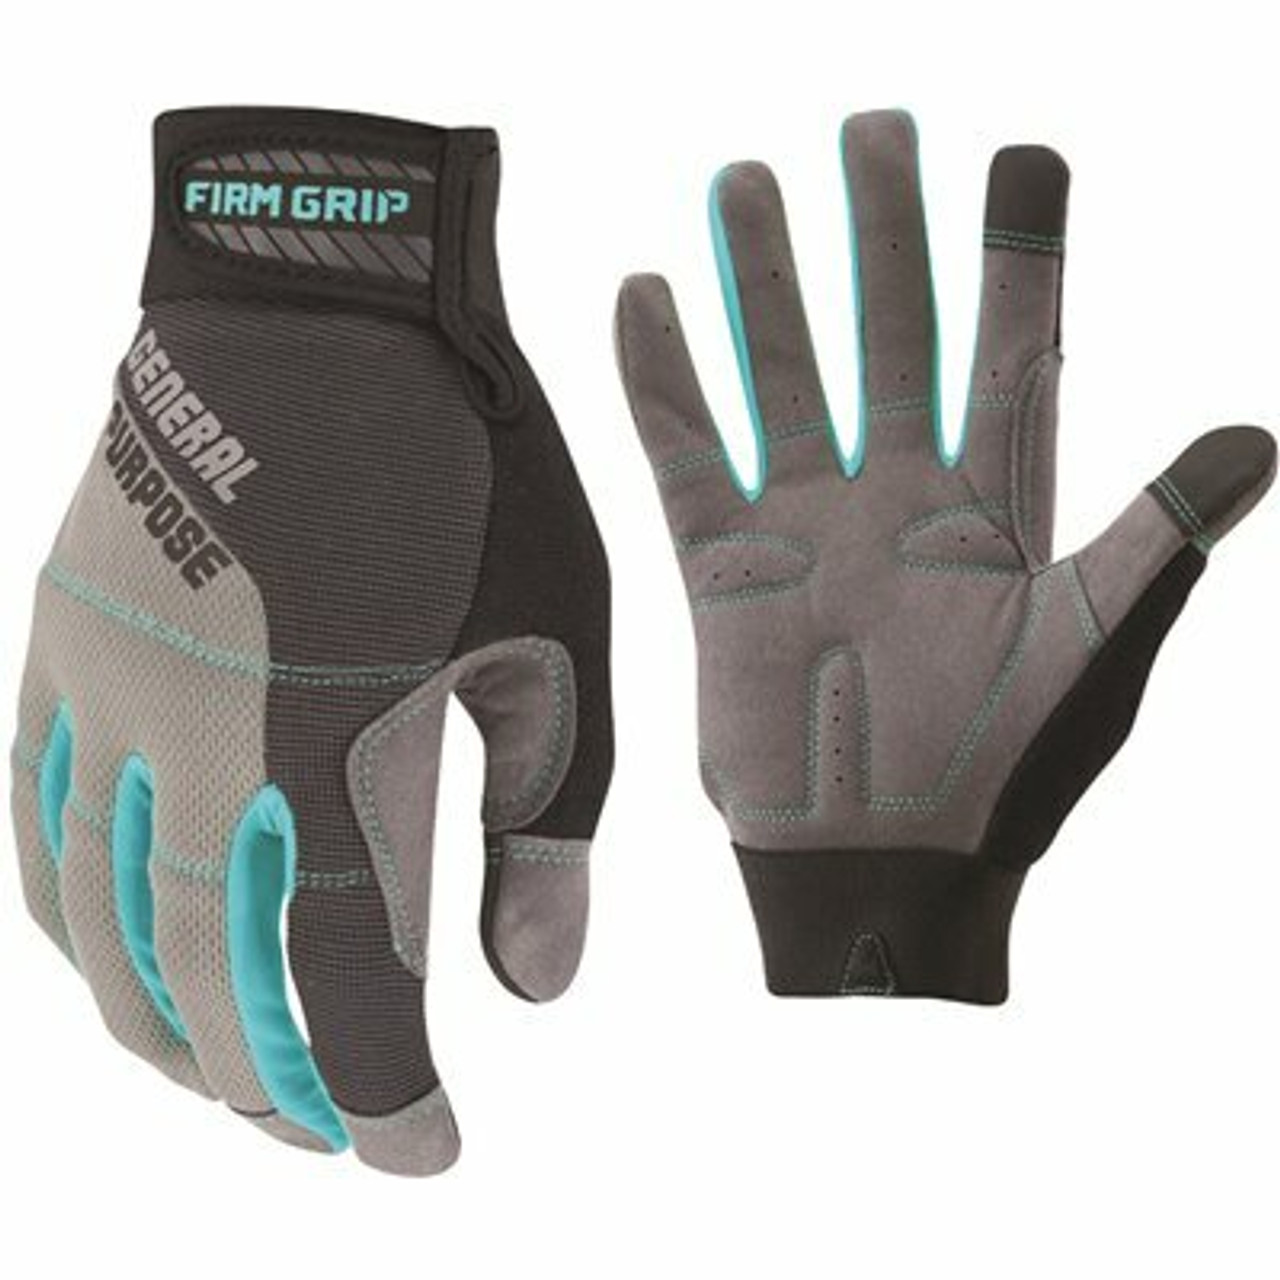 FIRM GRIP Medium Gray Women's General Purpose Synthetic Leather Glove - Pack of 6